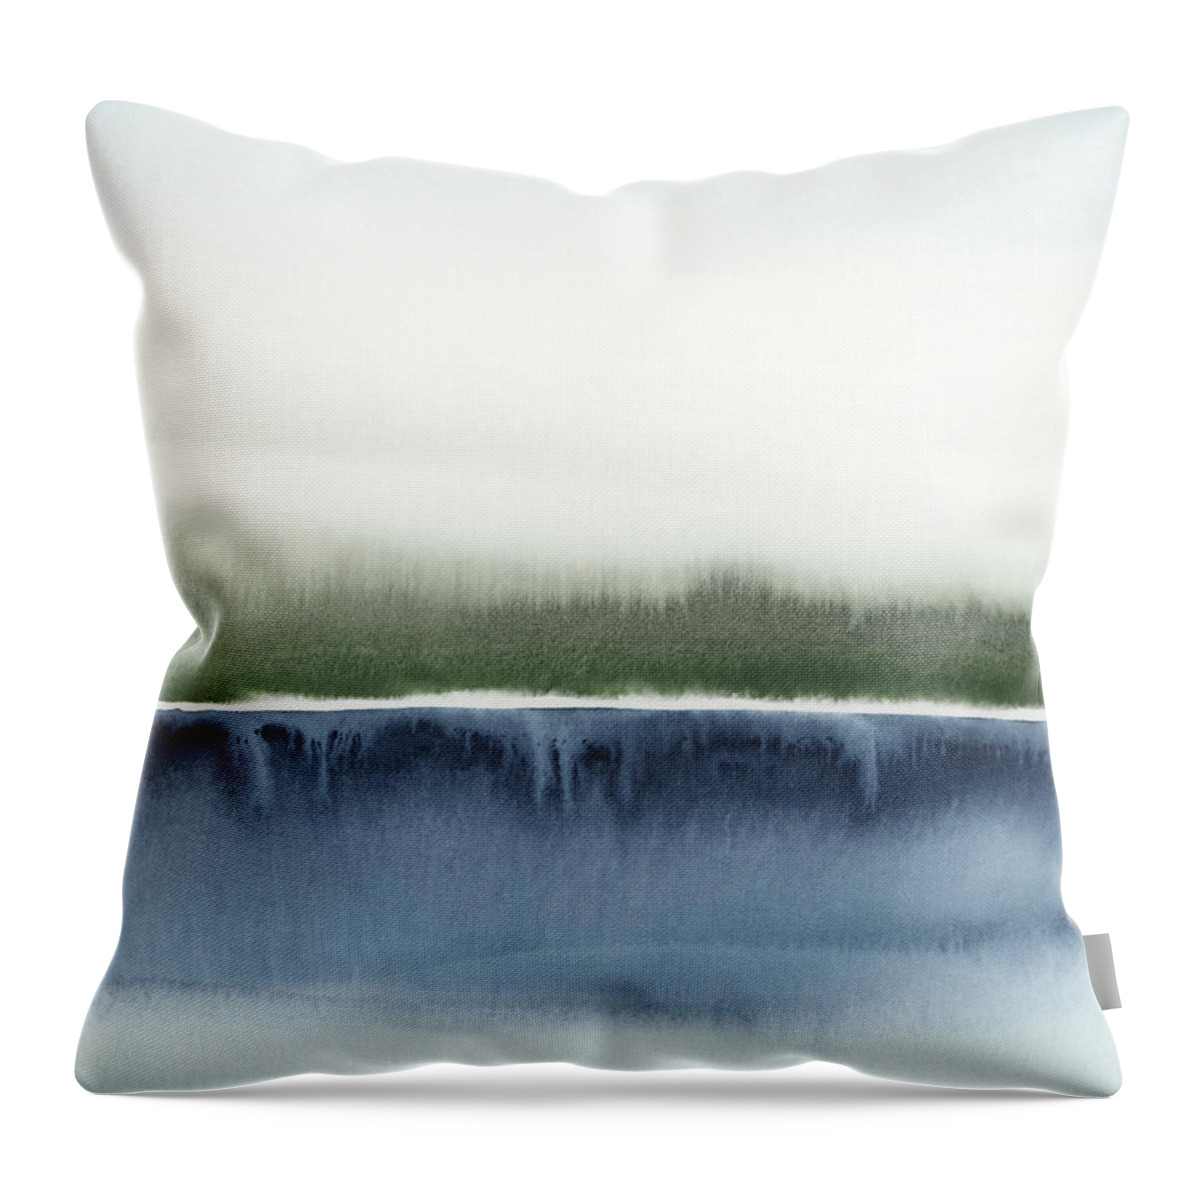 Navy Throw Pillow featuring the painting Forest Reflection I by Rachel Elise